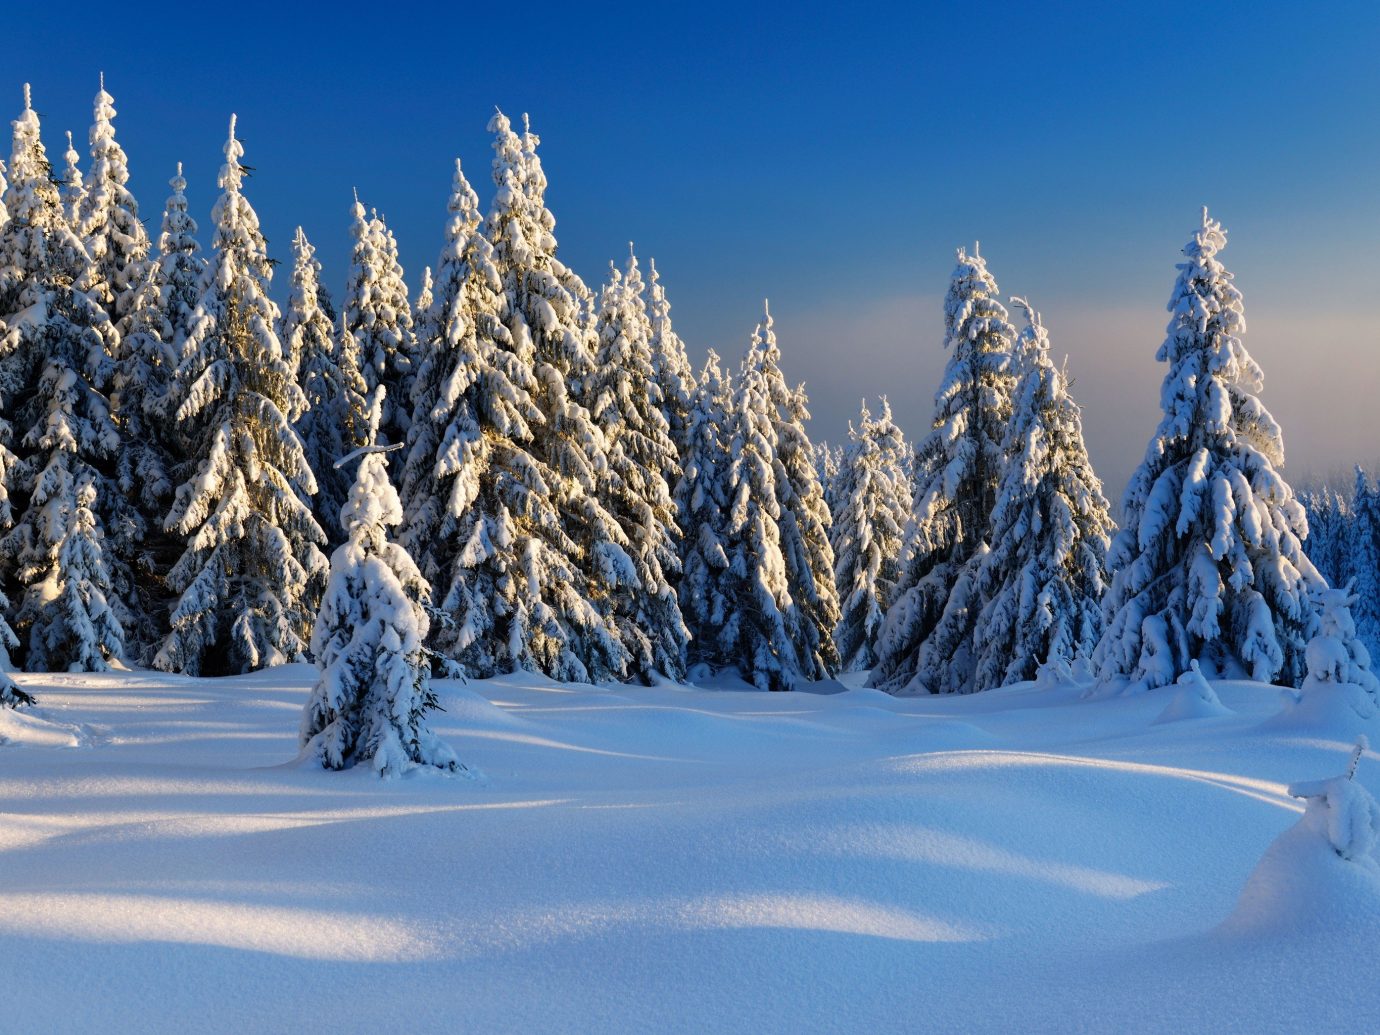 Trip Ideas snow outdoor tree sky skiing Winter Nature weather season plant slope mountain woody plant freezing fir spruce mountain range larch frost branch piste